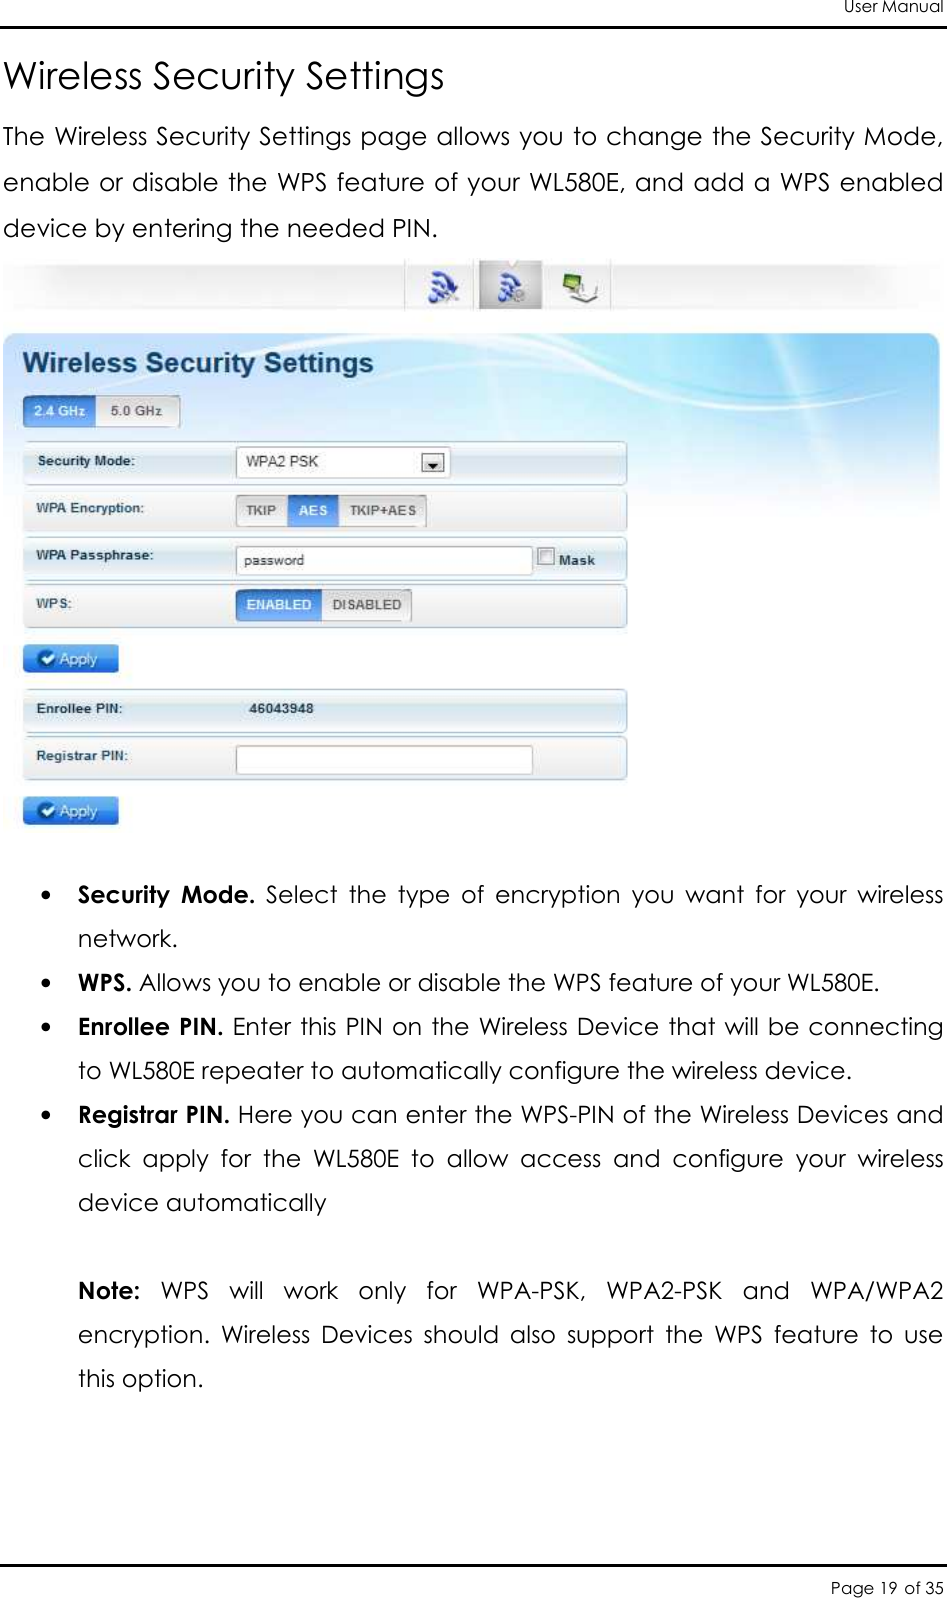 User Manual Page 19 of 35 Wireless Security Settings The Wireless Security Settings page allows you to change the Security Mode, enable or disable the WPS feature of your WL580E, and add a WPS enabled device by entering the needed PIN.   • Security  Mode.  Select  the  type  of  encryption  you  want  for  your  wireless network.  • WPS. Allows you to enable or disable the WPS feature of your WL580E.  • Enrollee PIN. Enter this PIN  on the Wireless Device that will be connecting to WL580E repeater to automatically configure the wireless device.  • Registrar PIN. Here you can enter the WPS-PIN of the Wireless Devices and click  apply  for  the  WL580E  to  allow  access  and  configure  your  wireless  device automatically   Note:  WPS  will  work  only  for  WPA-PSK,  WPA2-PSK  and  WPA/WPA2 encryption.  Wireless  Devices  should  also  support  the  WPS  feature  to  use this option.     